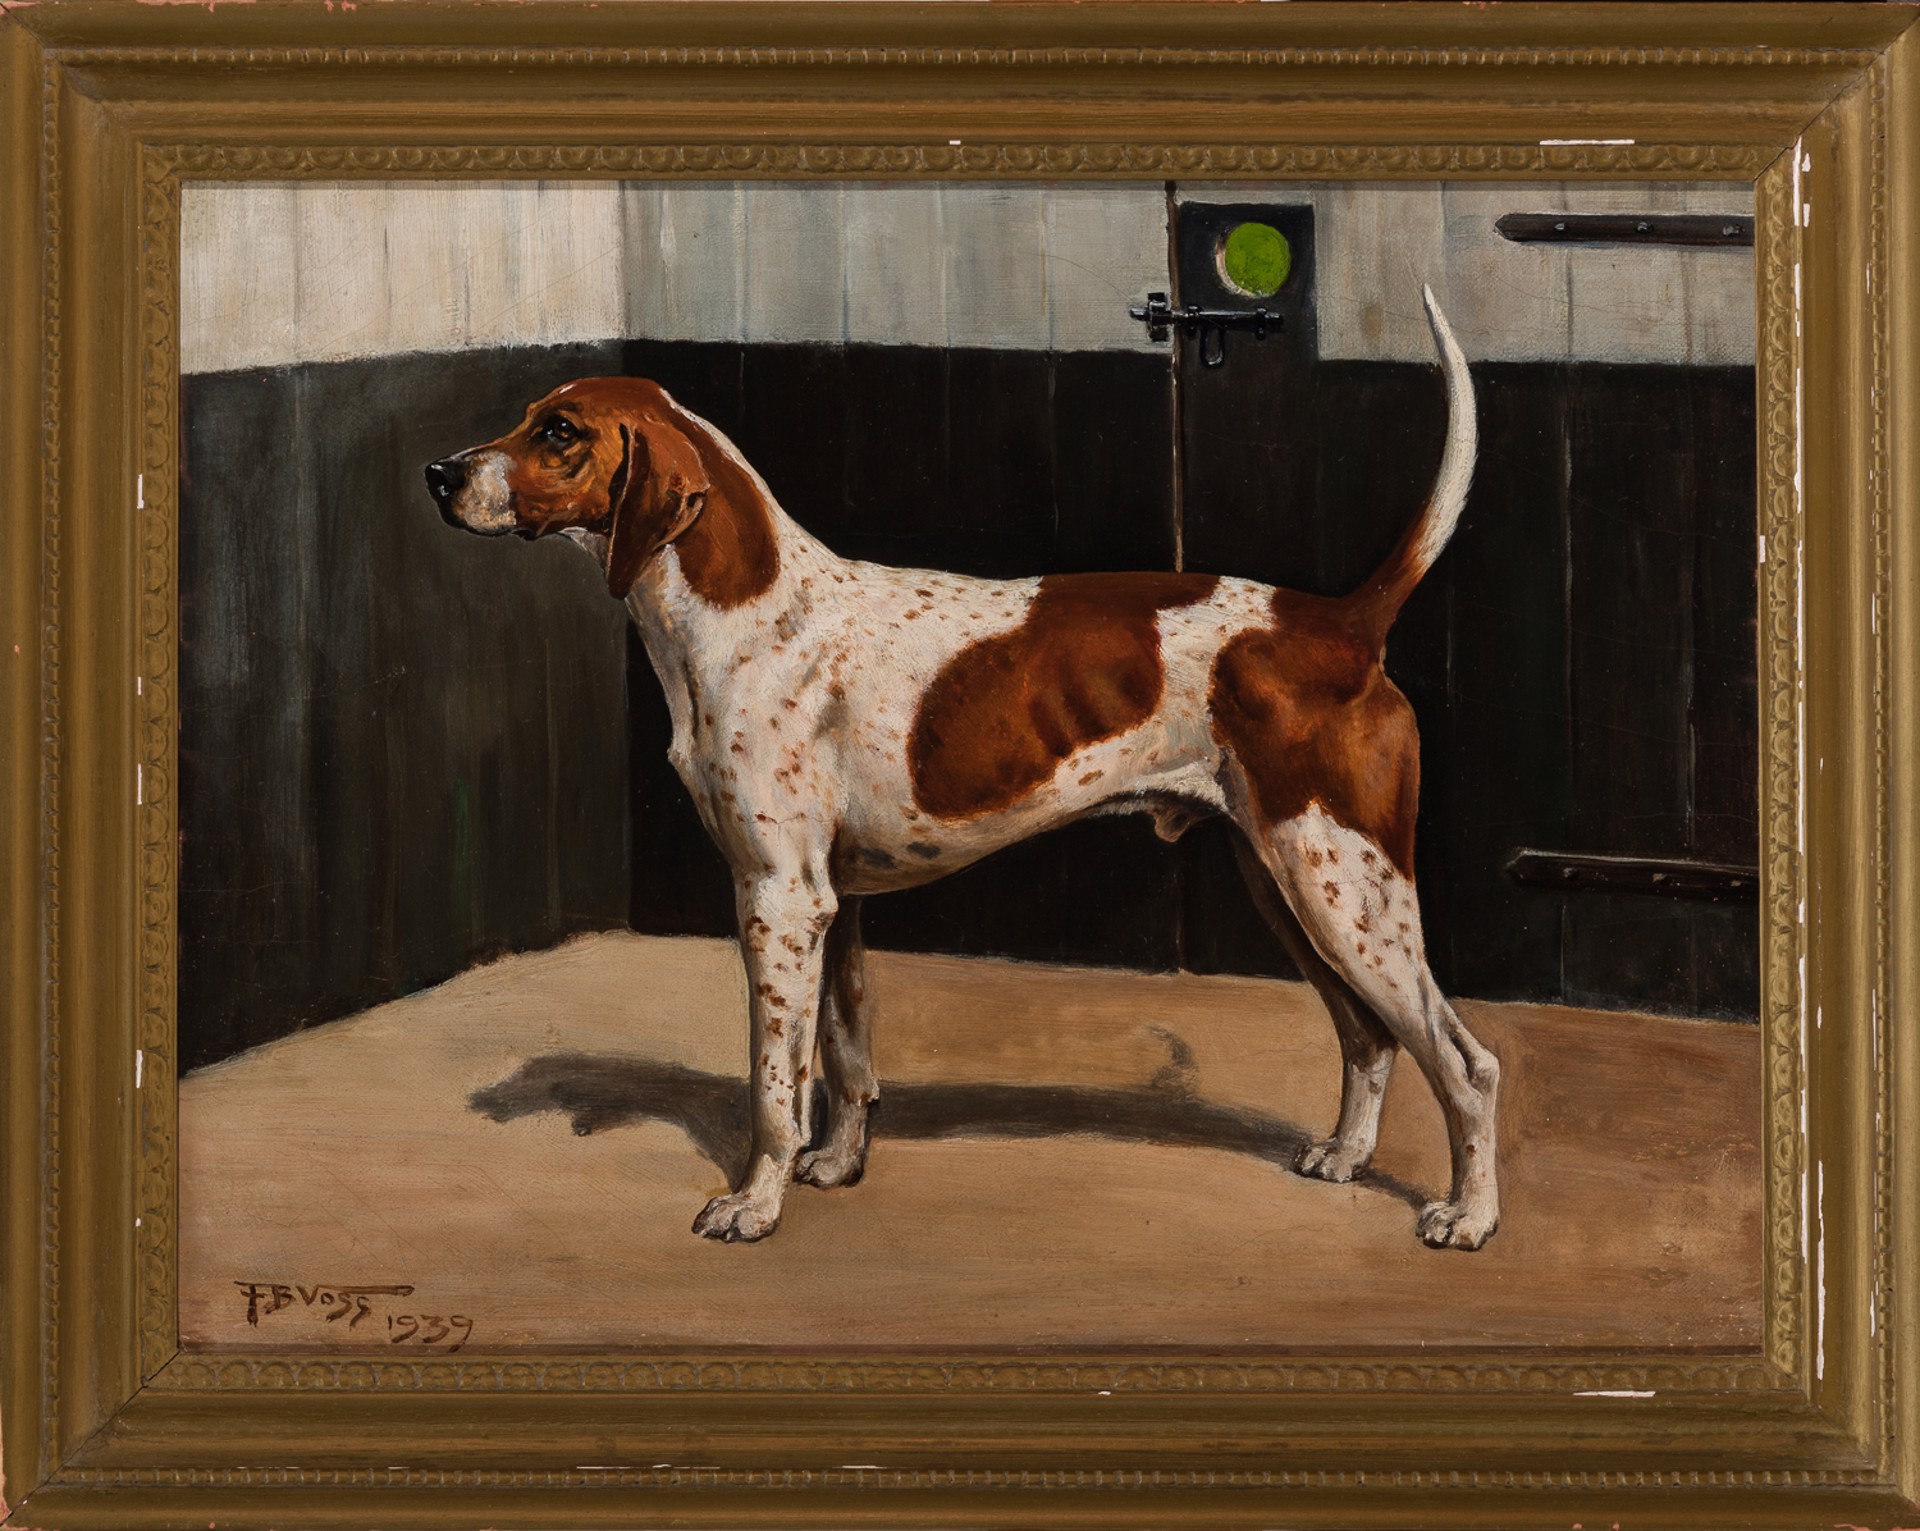 Portrait of a Hound by Franklin Brooke Voss